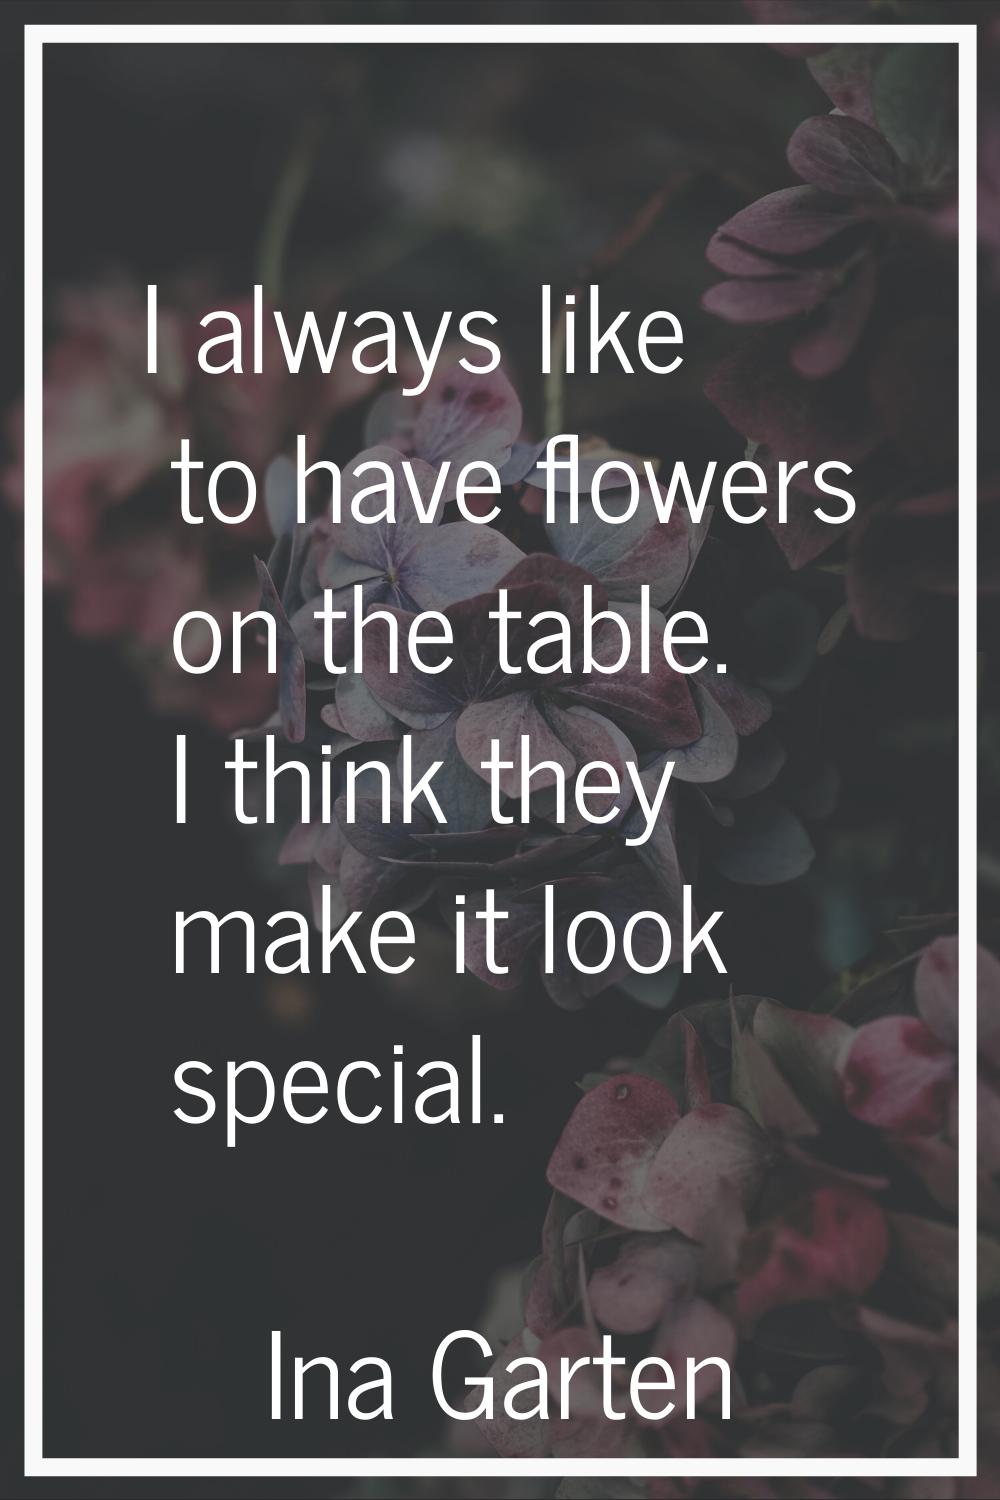 I always like to have flowers on the table. I think they make it look special.